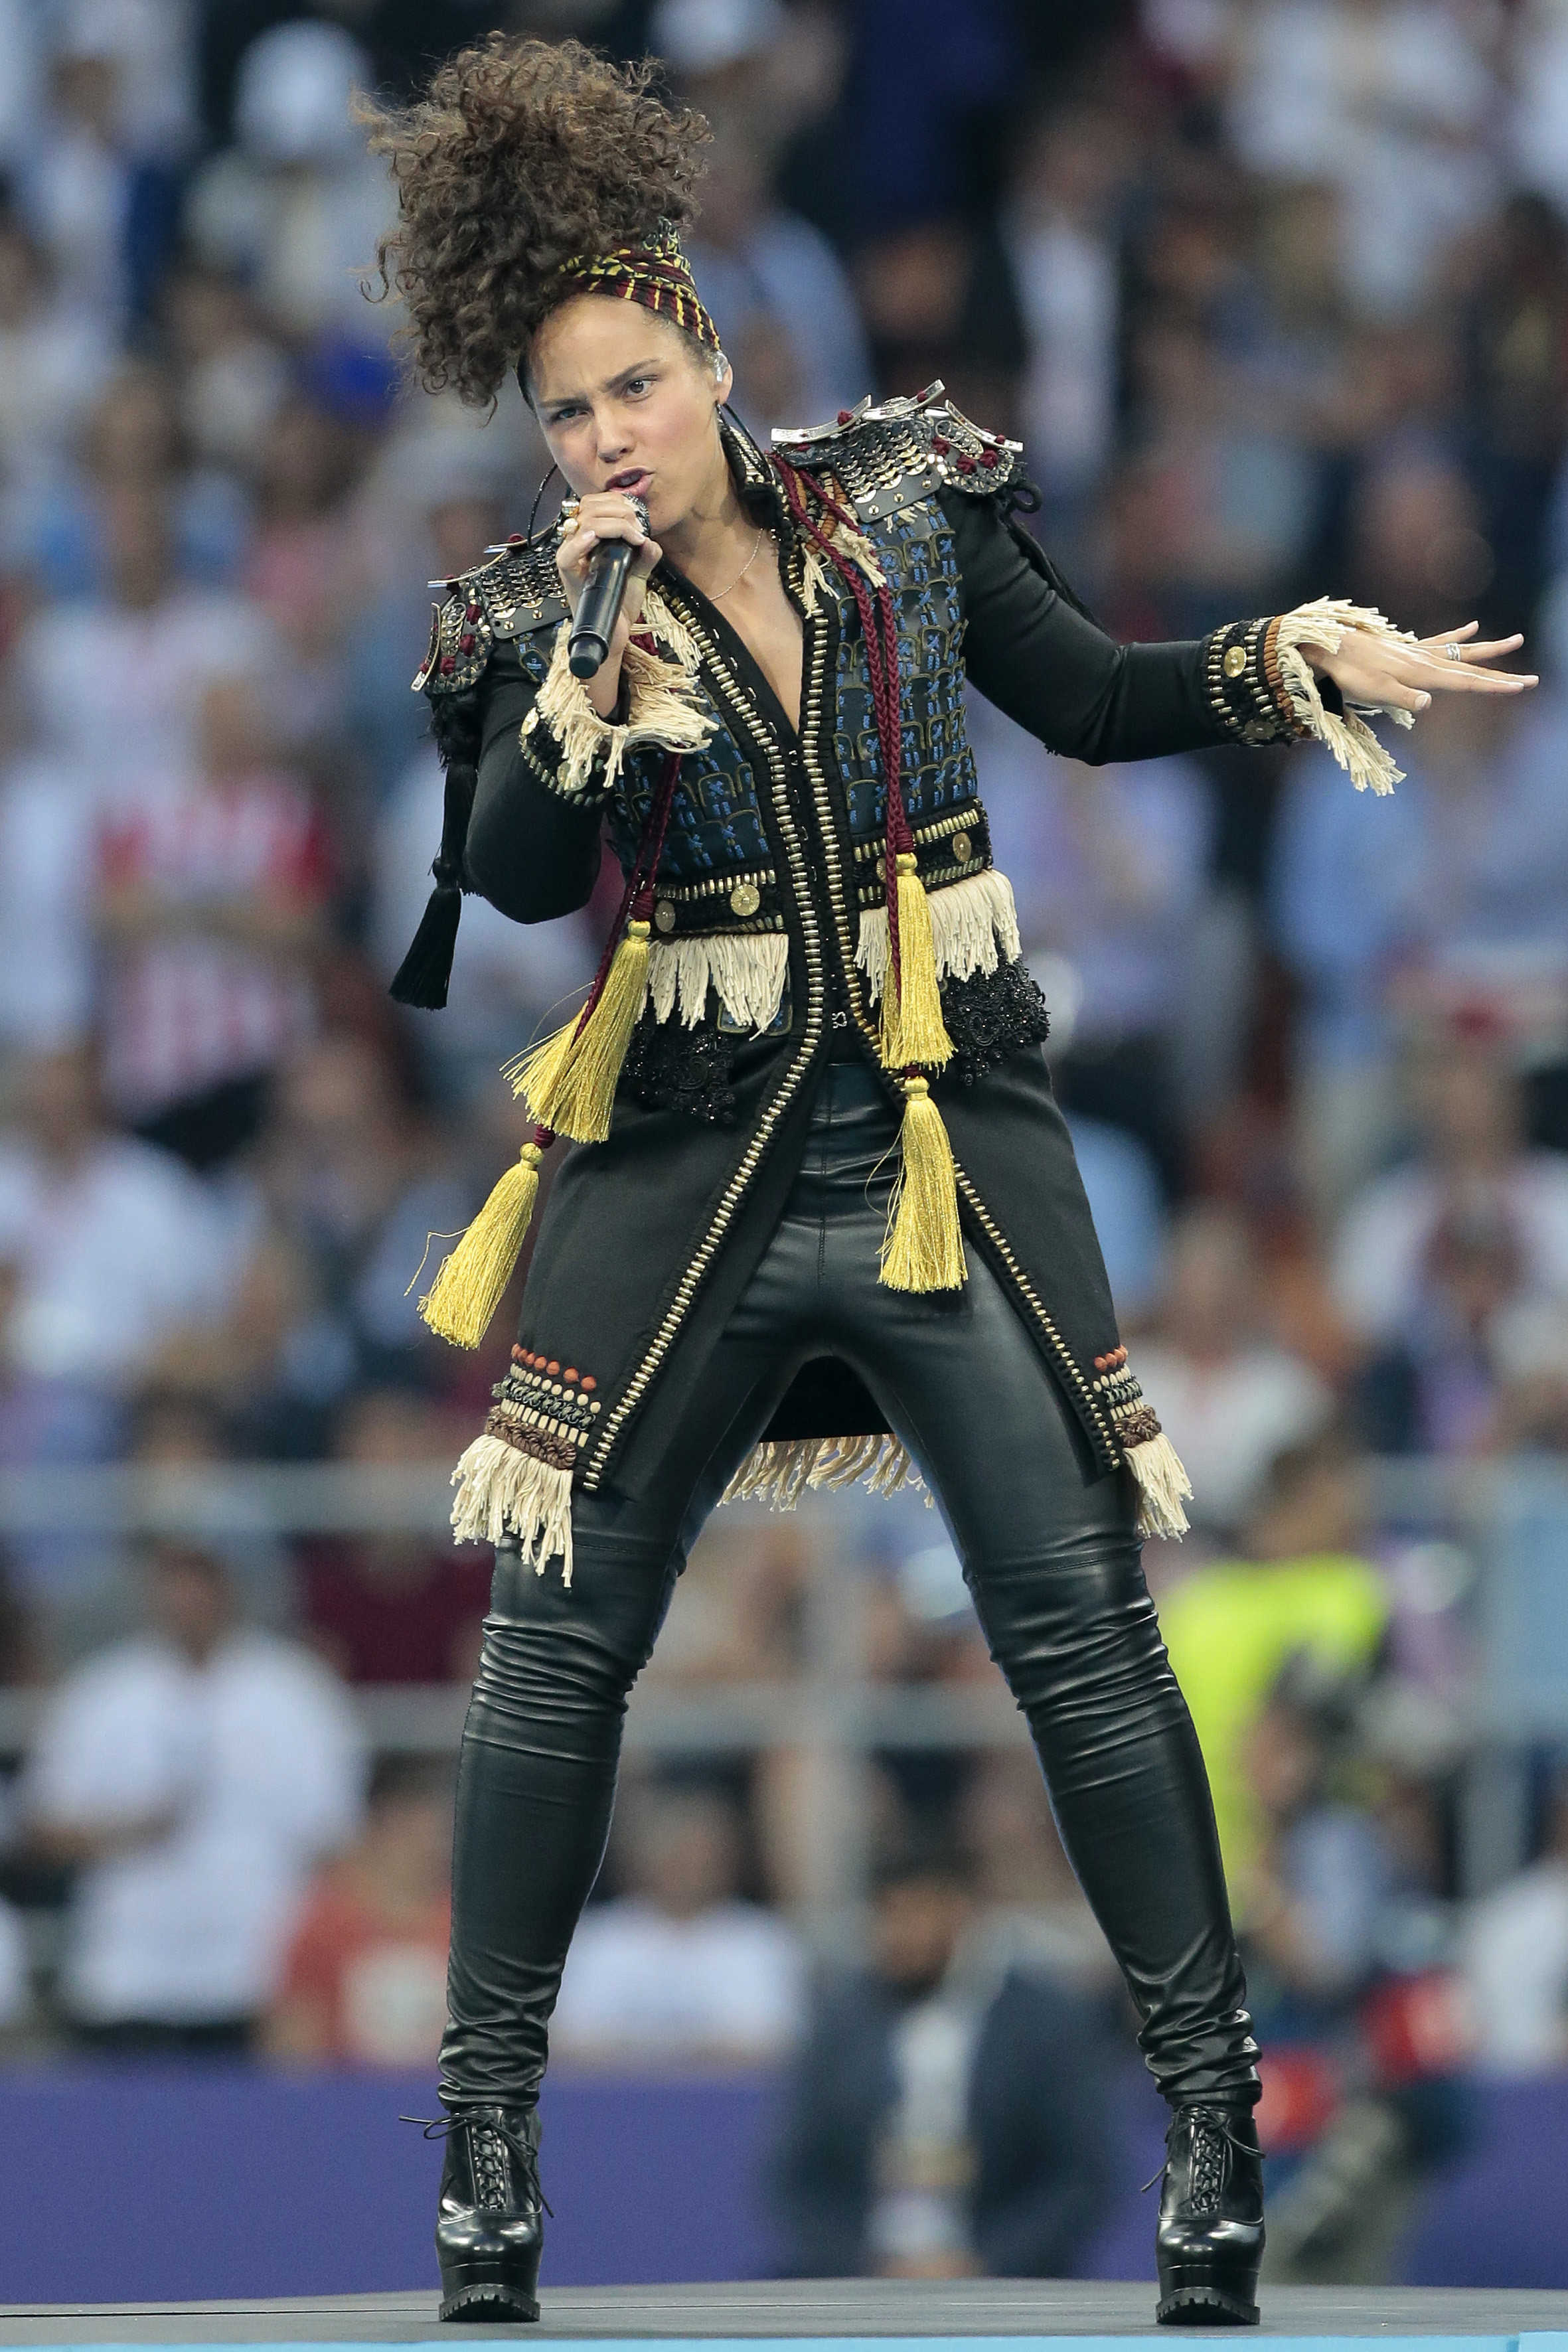 Alicia Keys performs at the UEFA Champions League Final